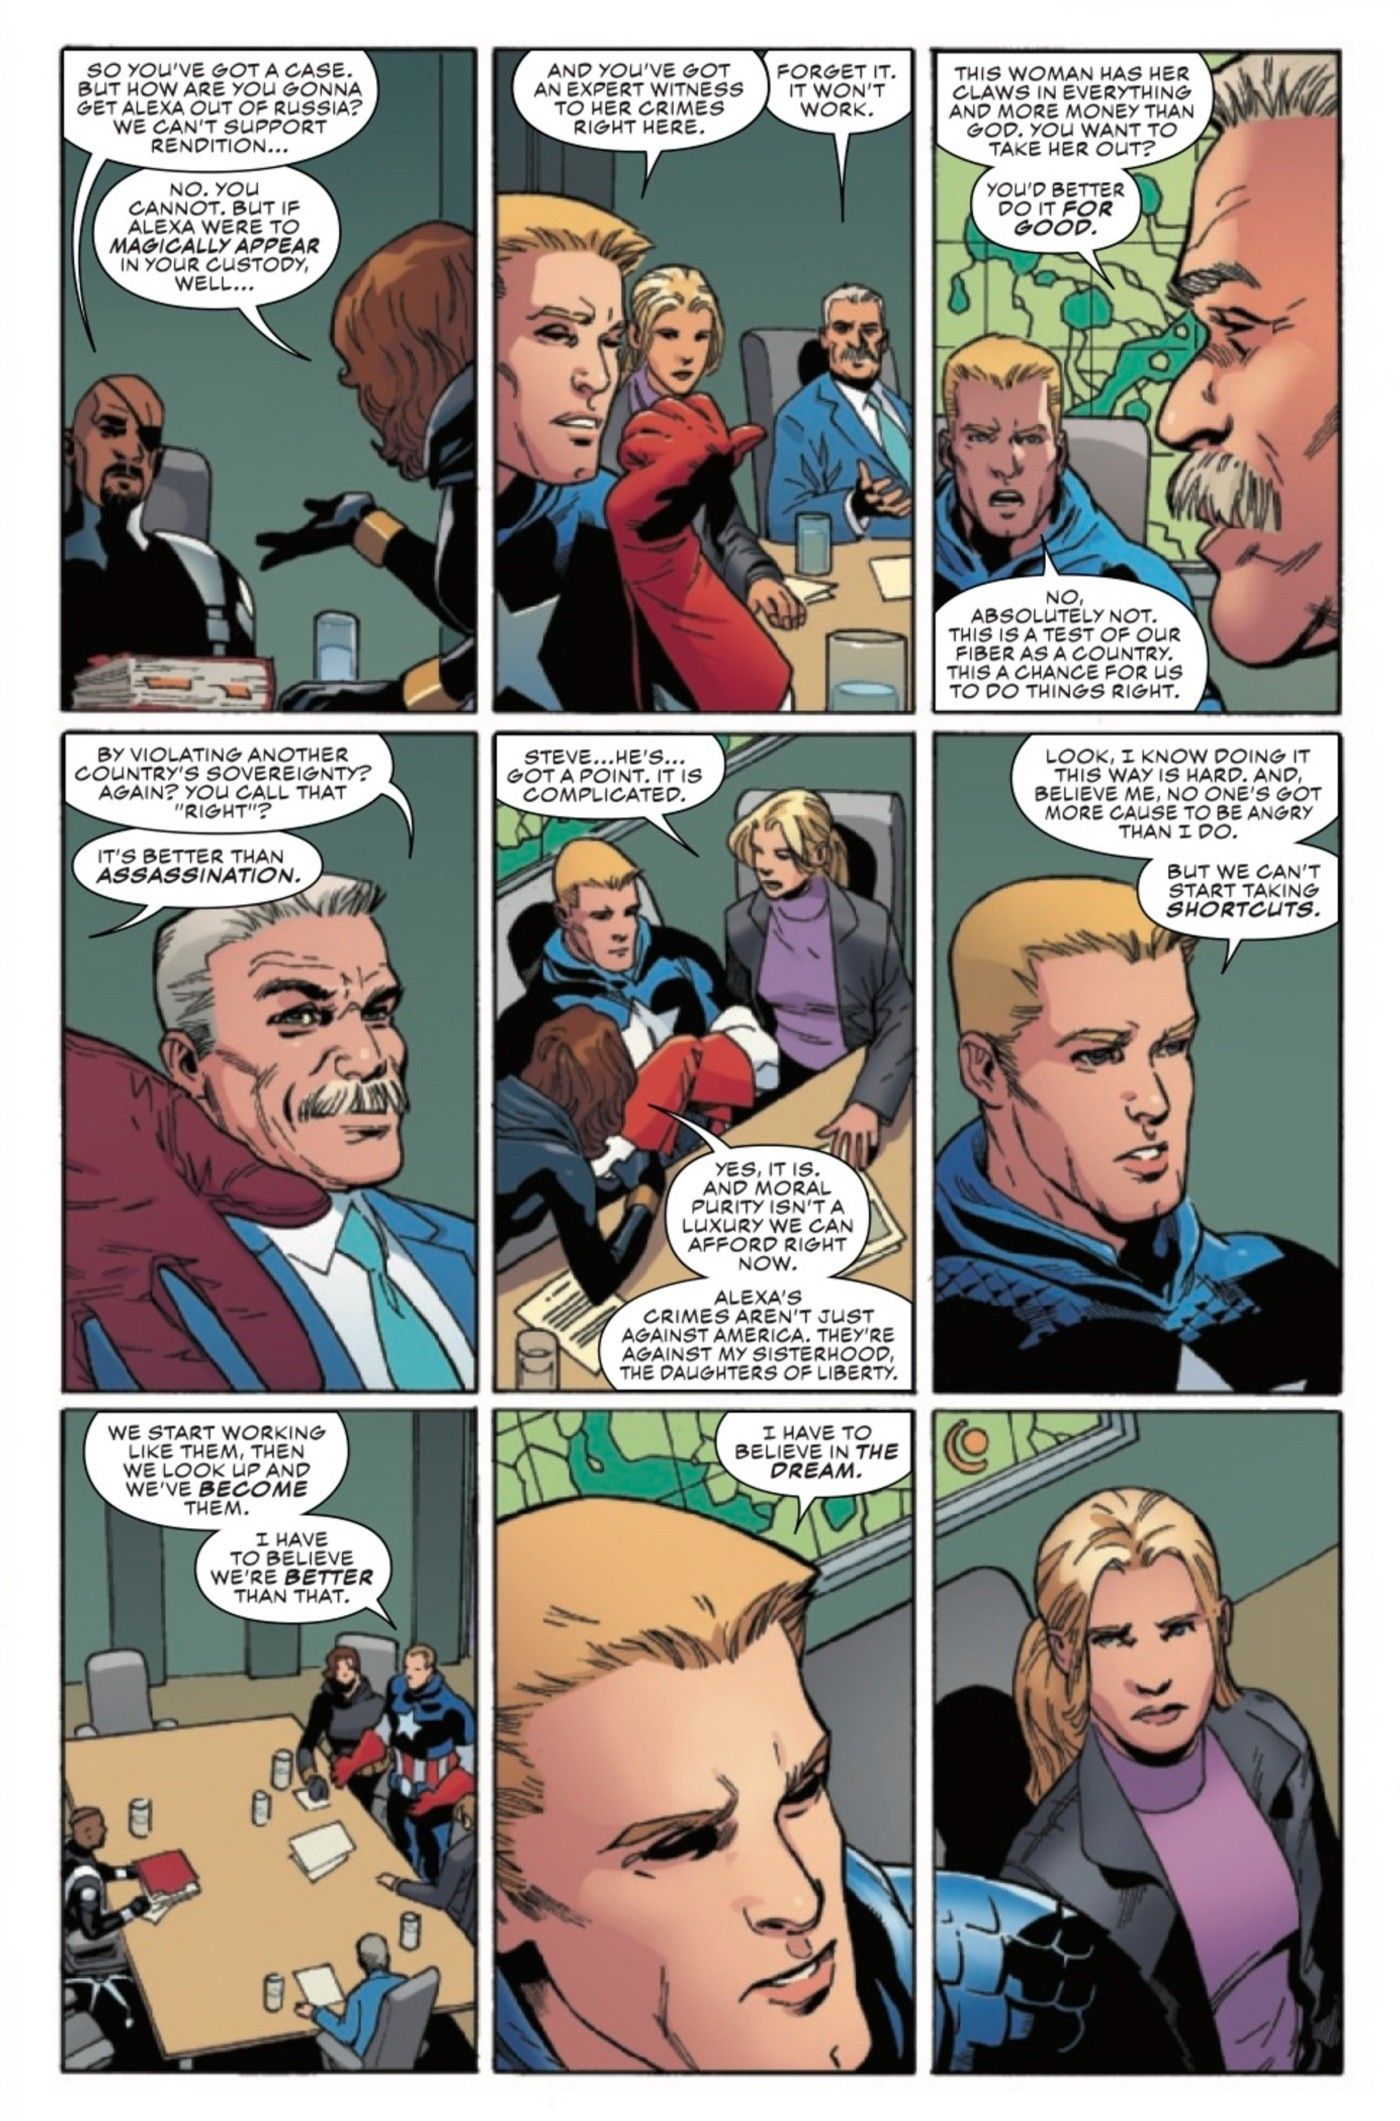 Captain America 29 preview page 1 (2)